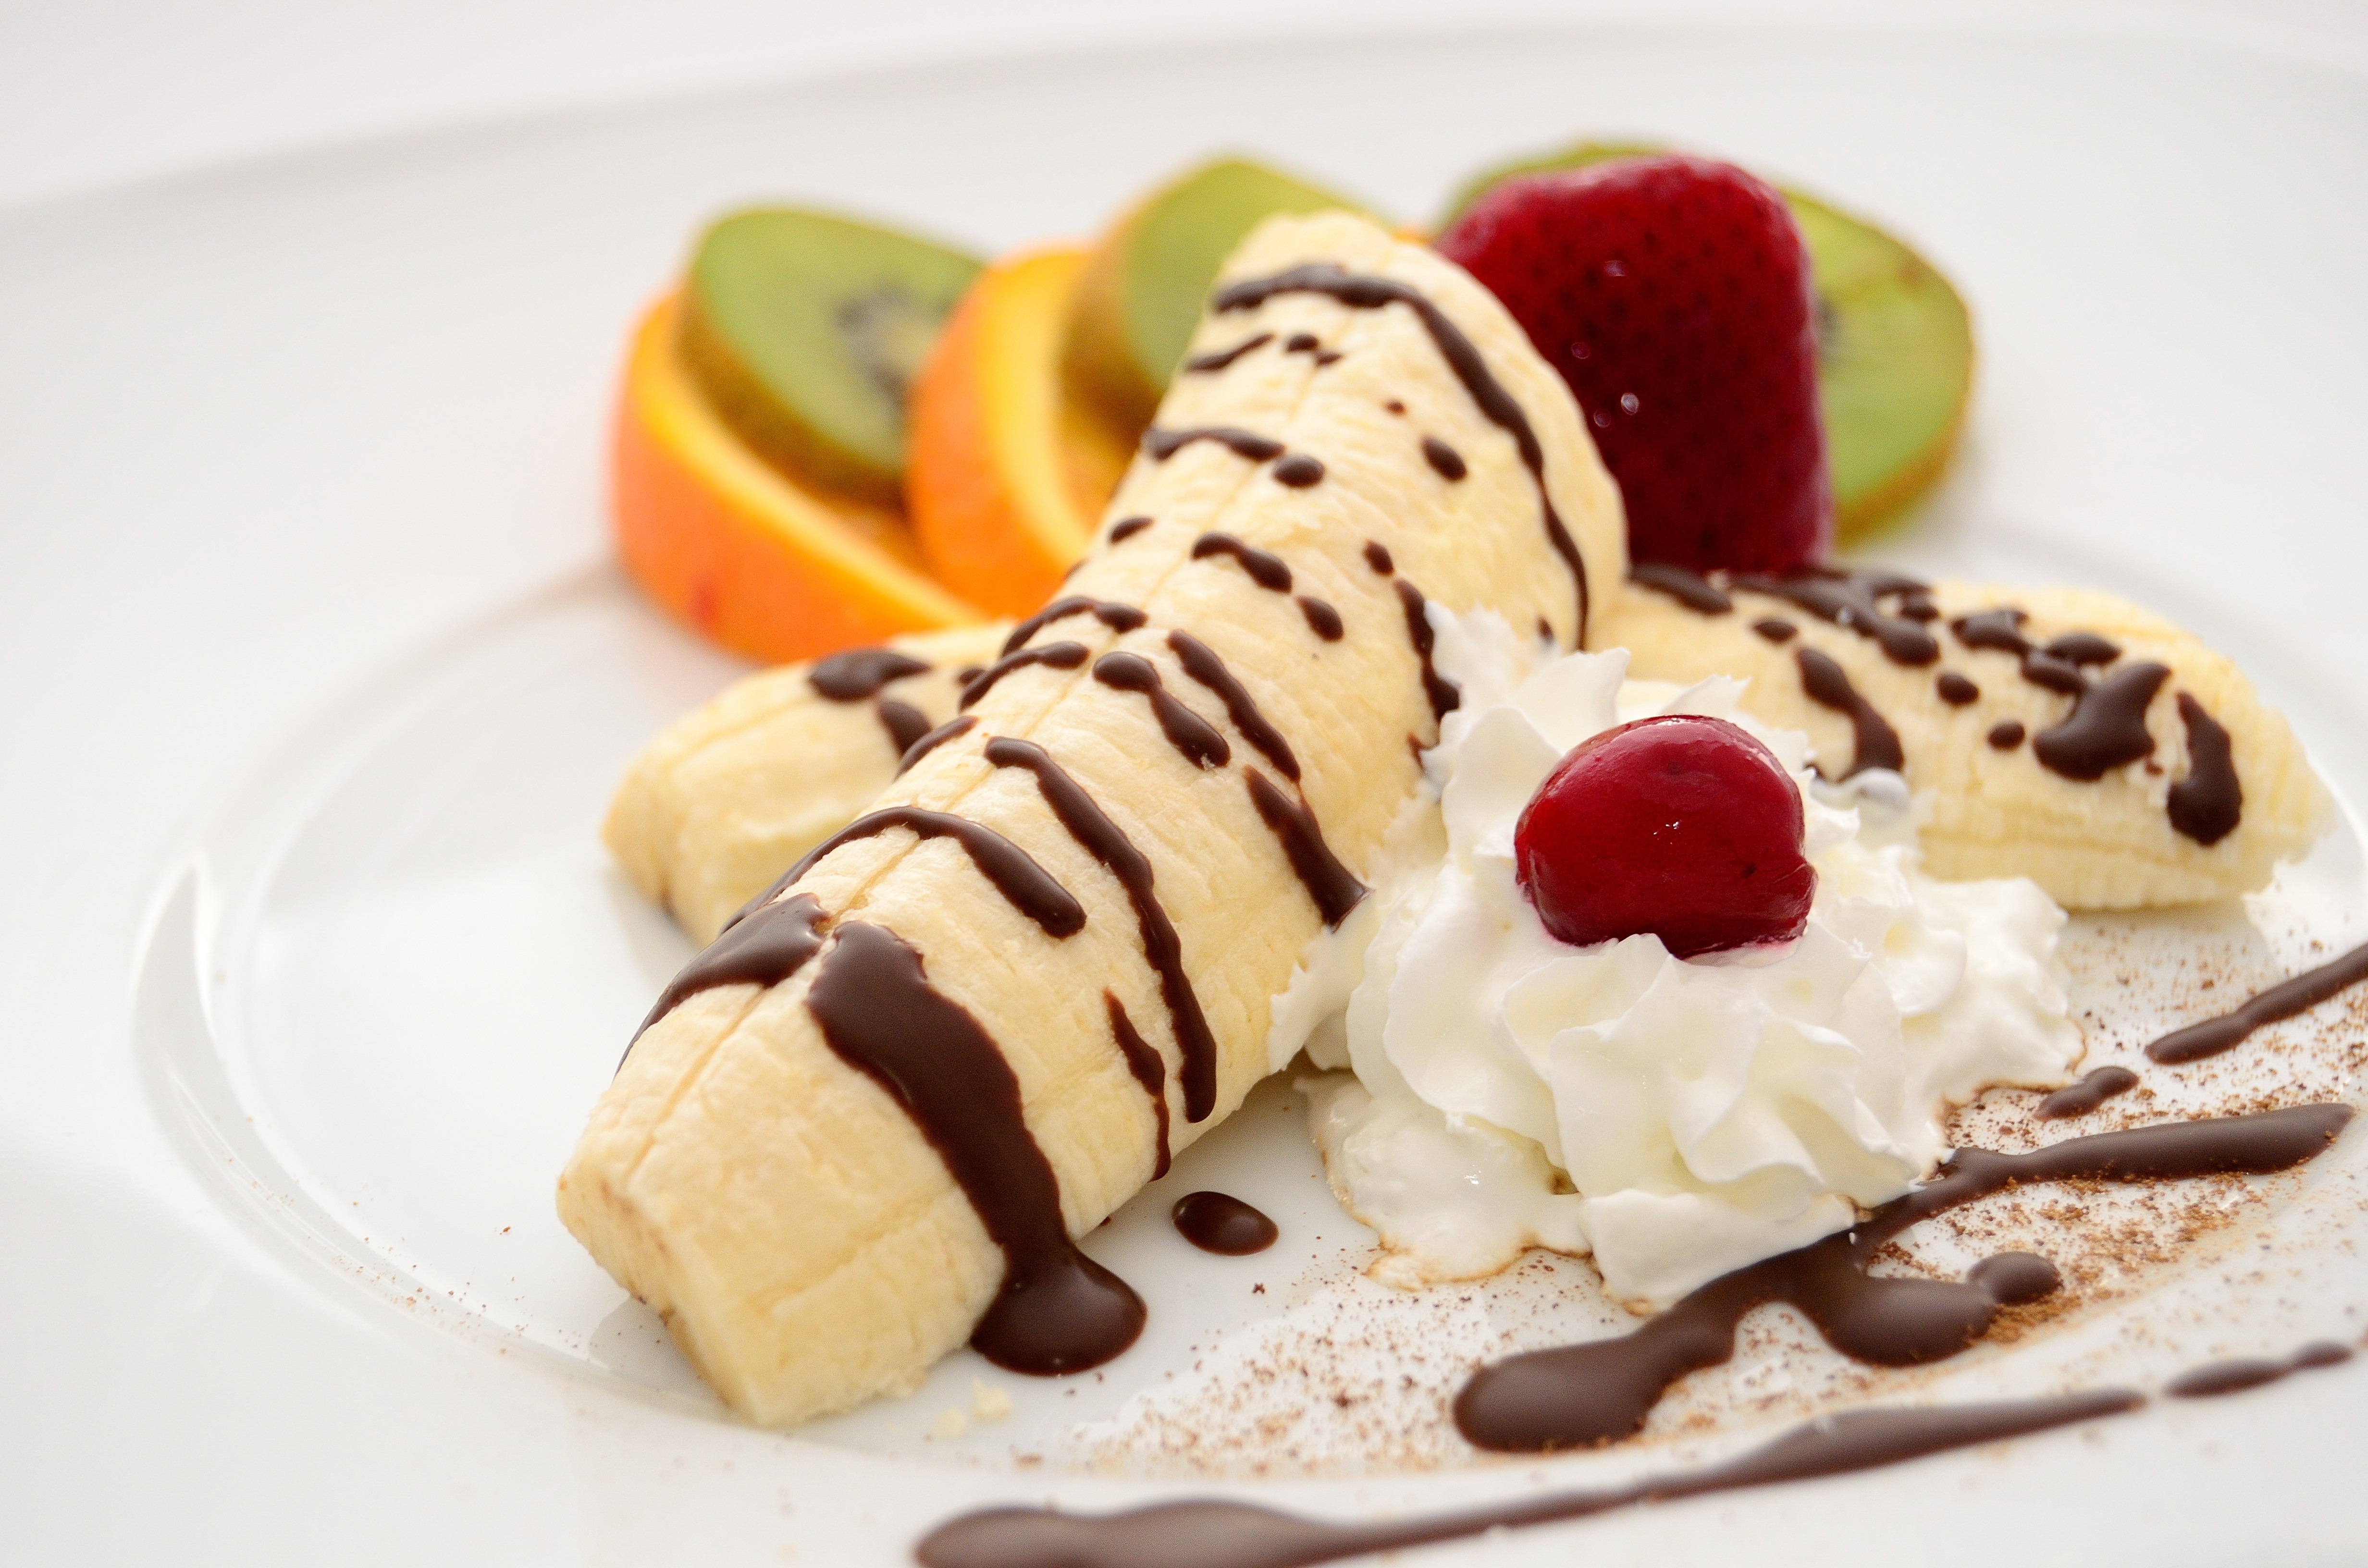 Free photo Delicious dessert made of fruits with chocolate syrup